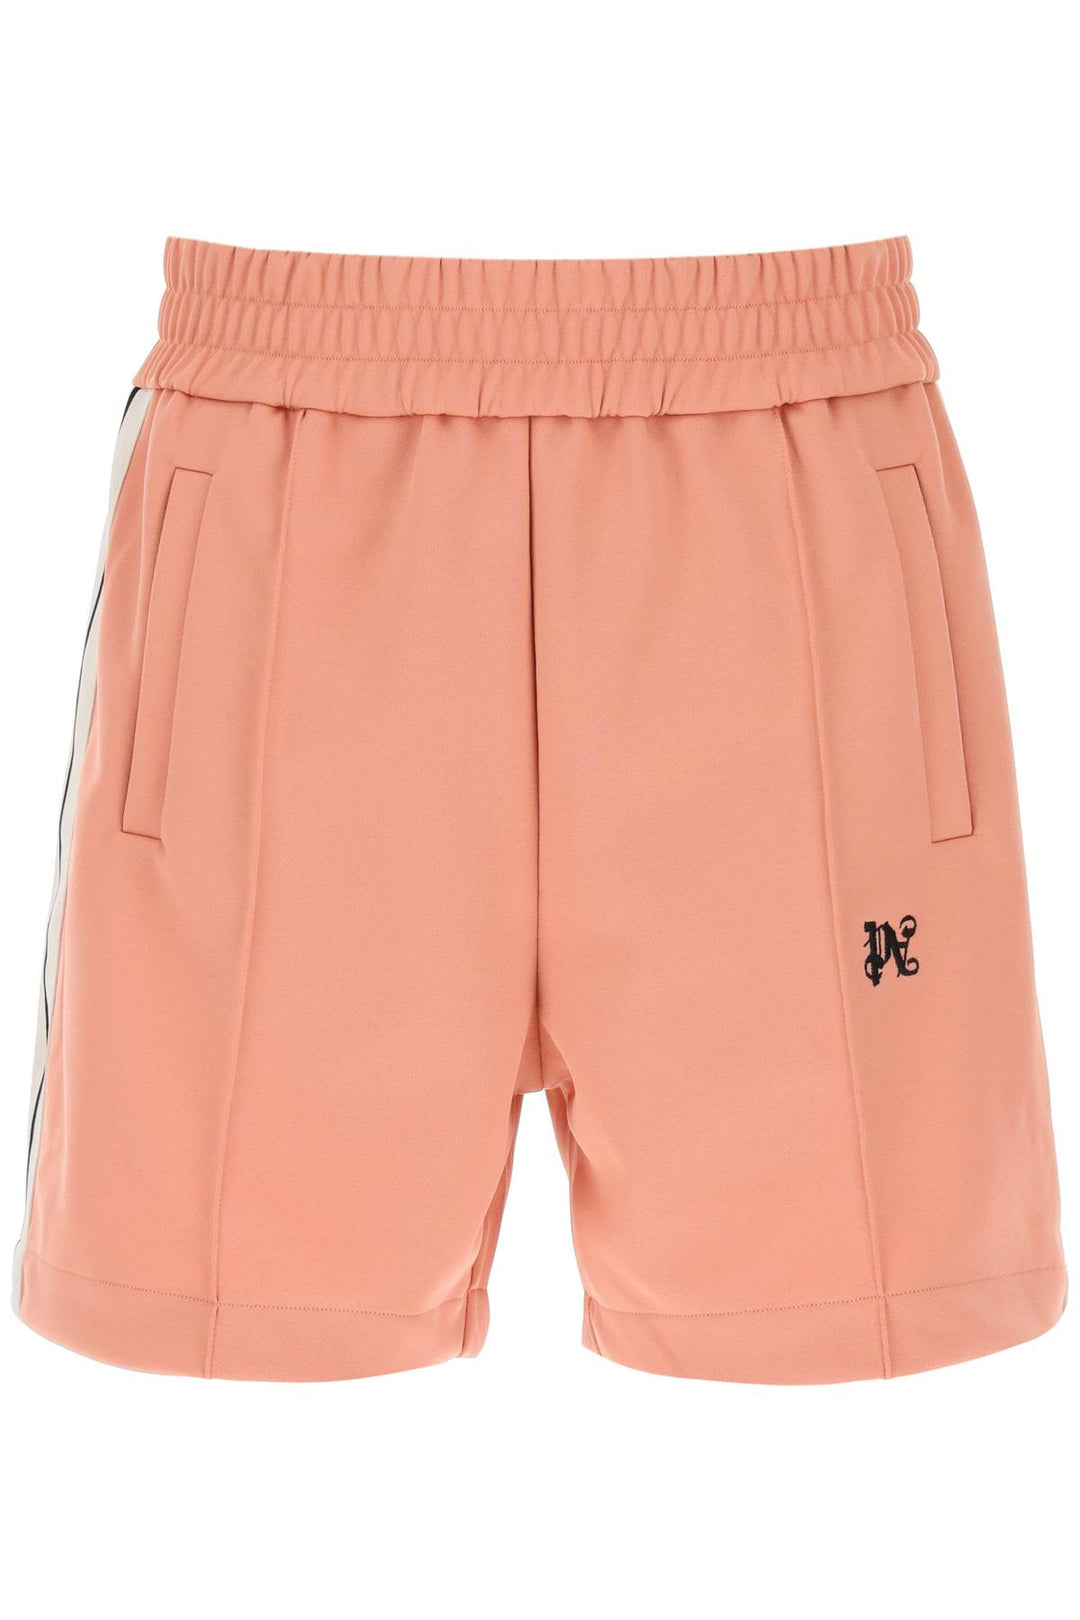 Palm Angels Sweatshorts With Side Bands   Rosa